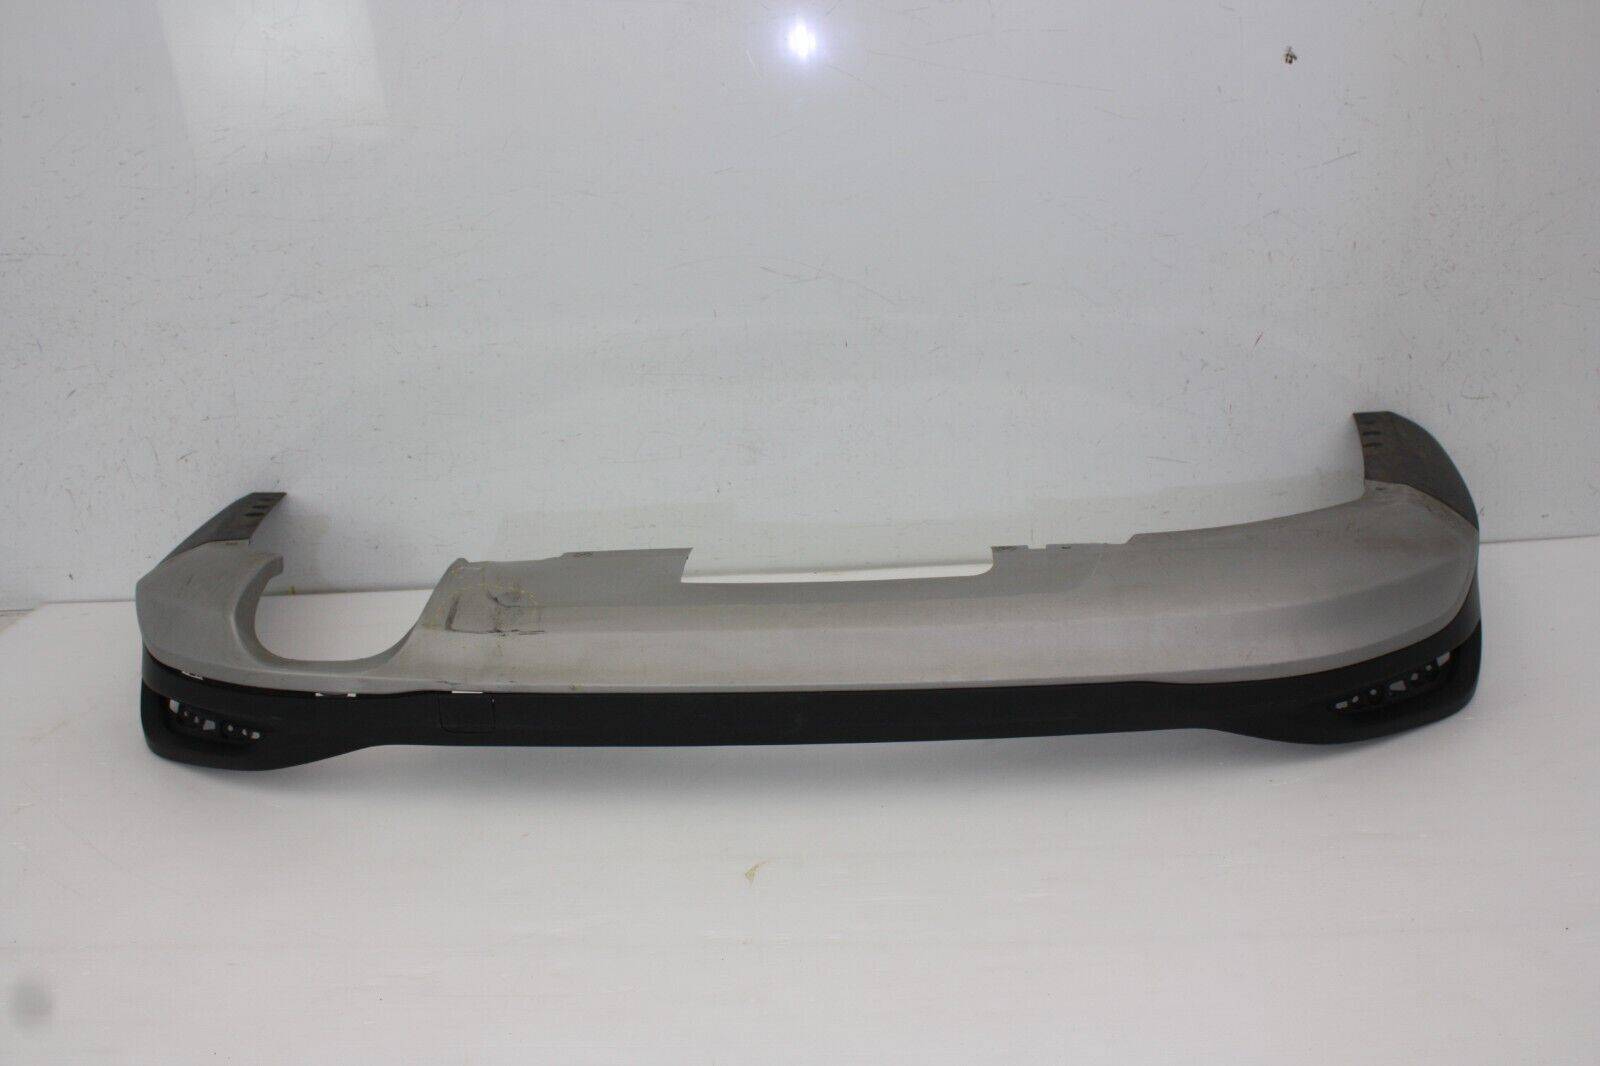 Ford-Focus-Rear-Bumper-Lower-Section-JX7B-17F954-J-Genuine-SEE-PICS-175467150053